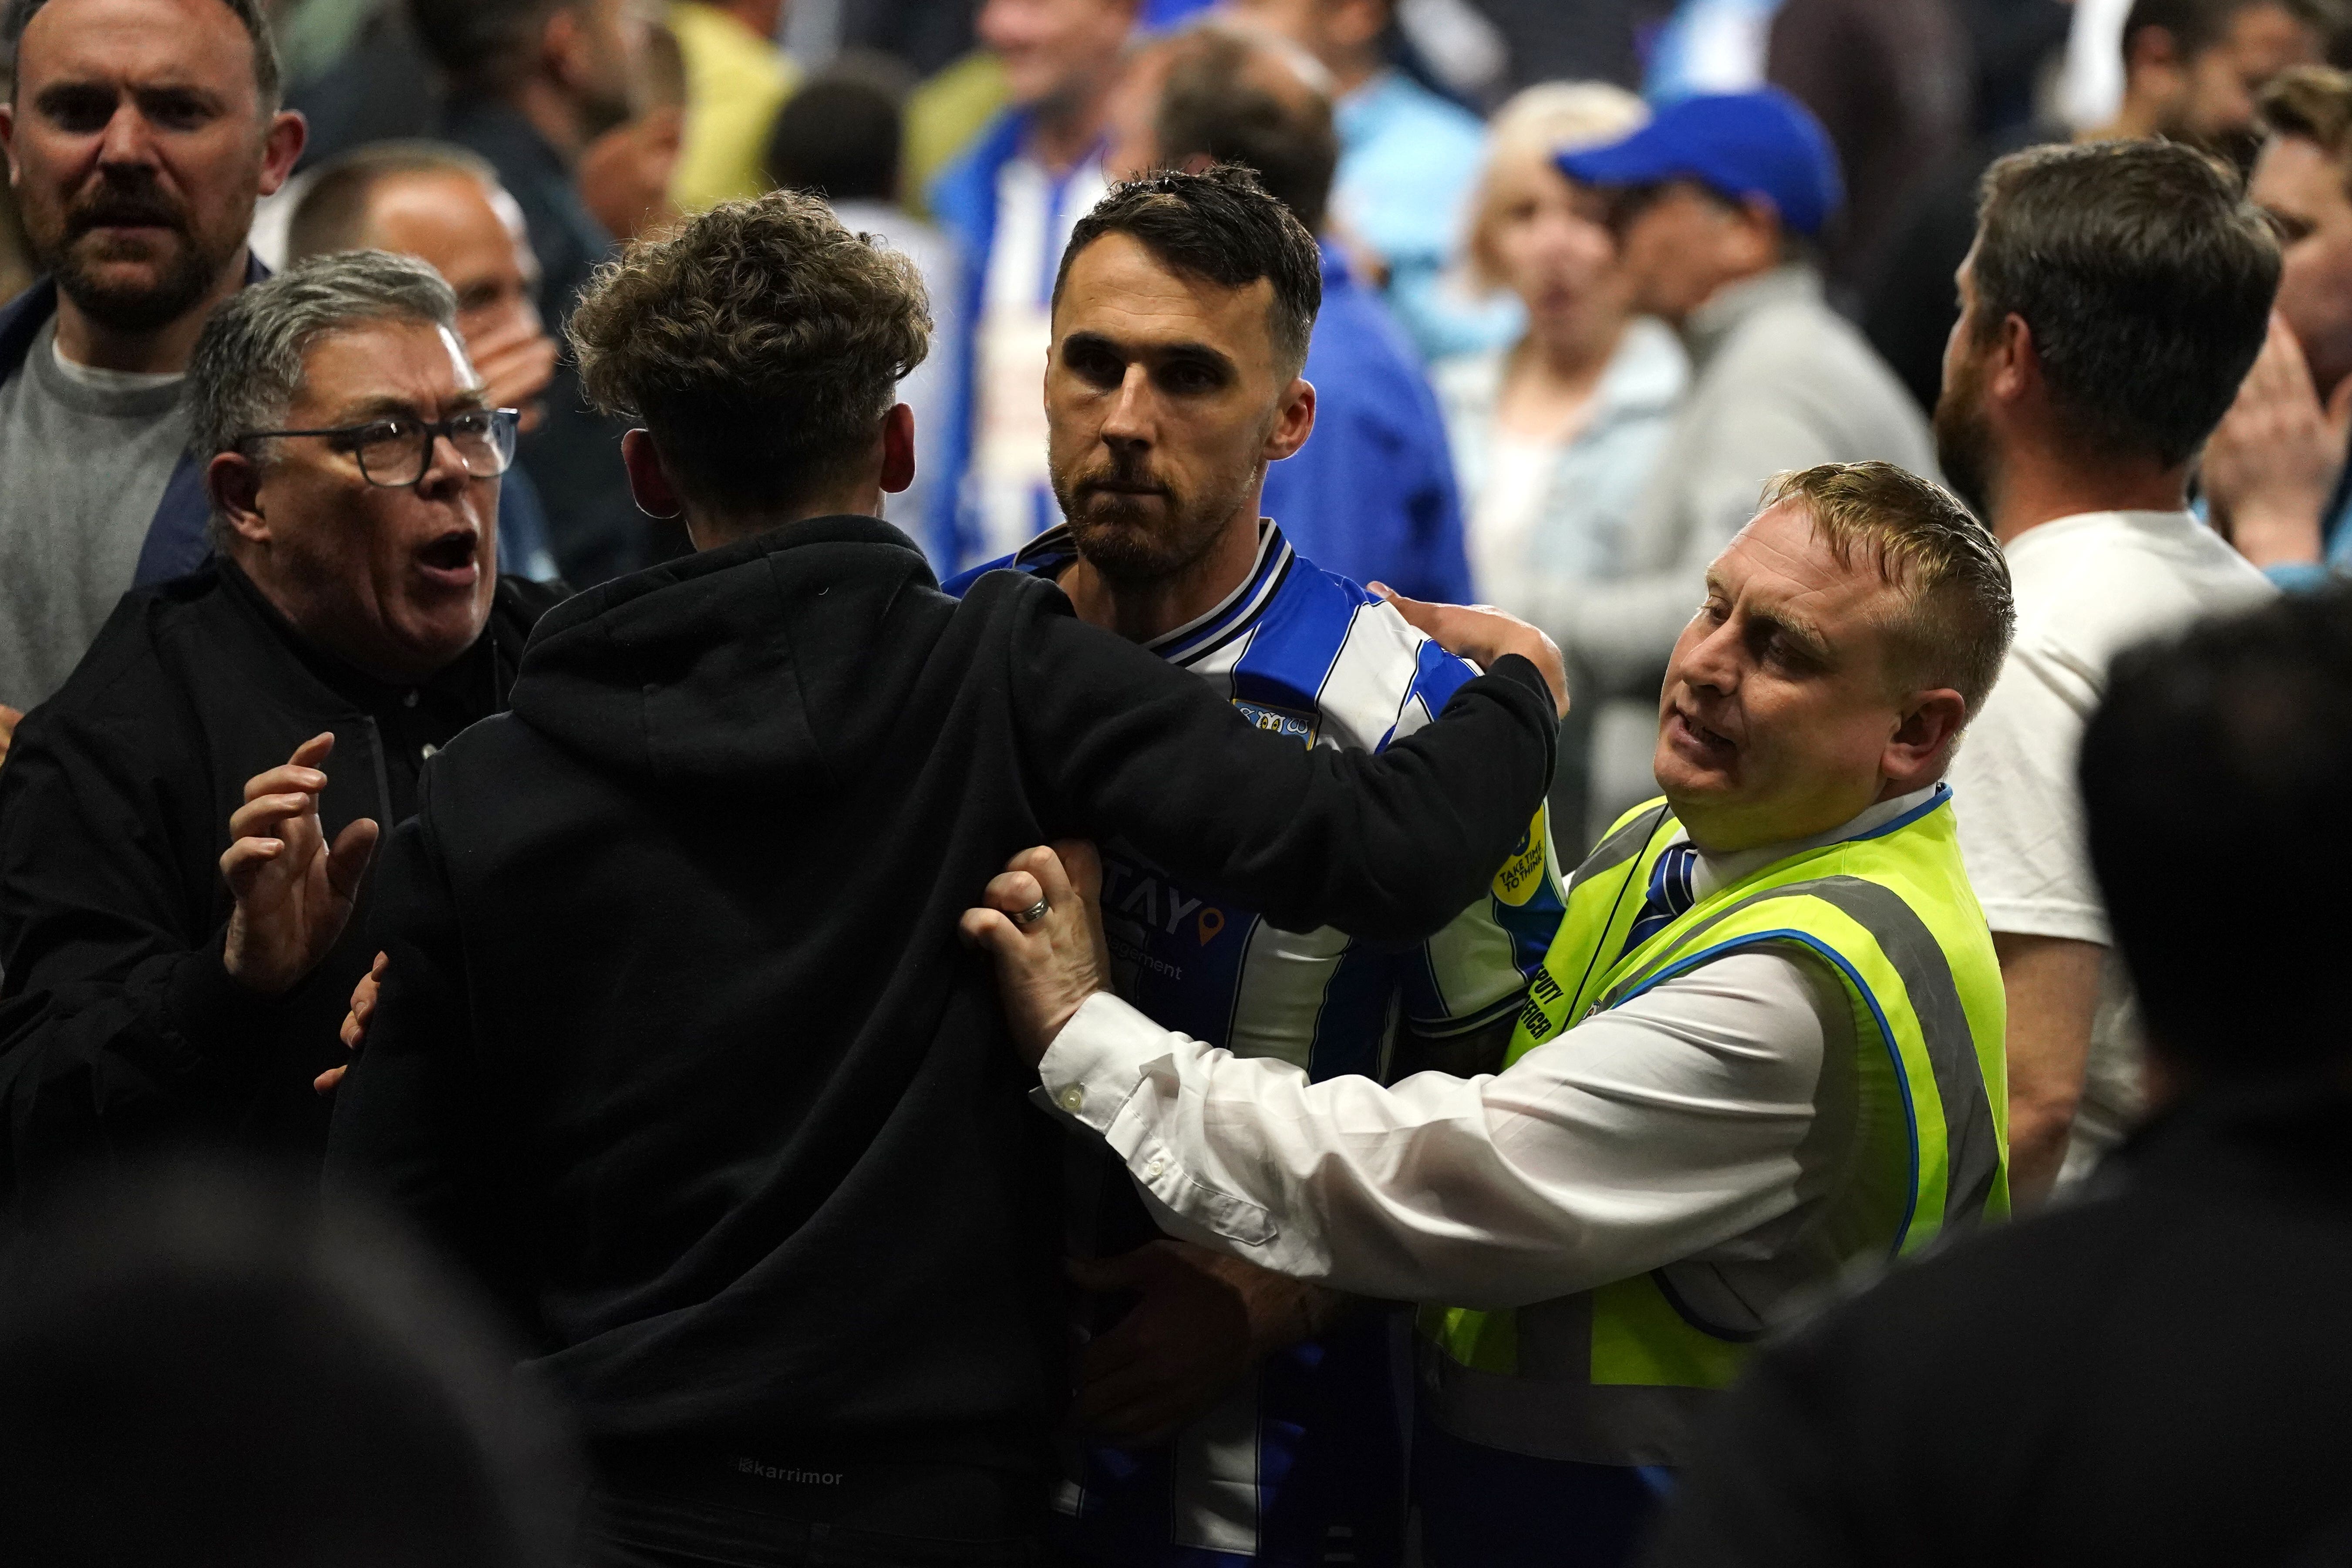 Lee Gregory was helped off the pitch after Sheffield Wednesday’s stunning win against Peterborough (Nick Potts/PA)